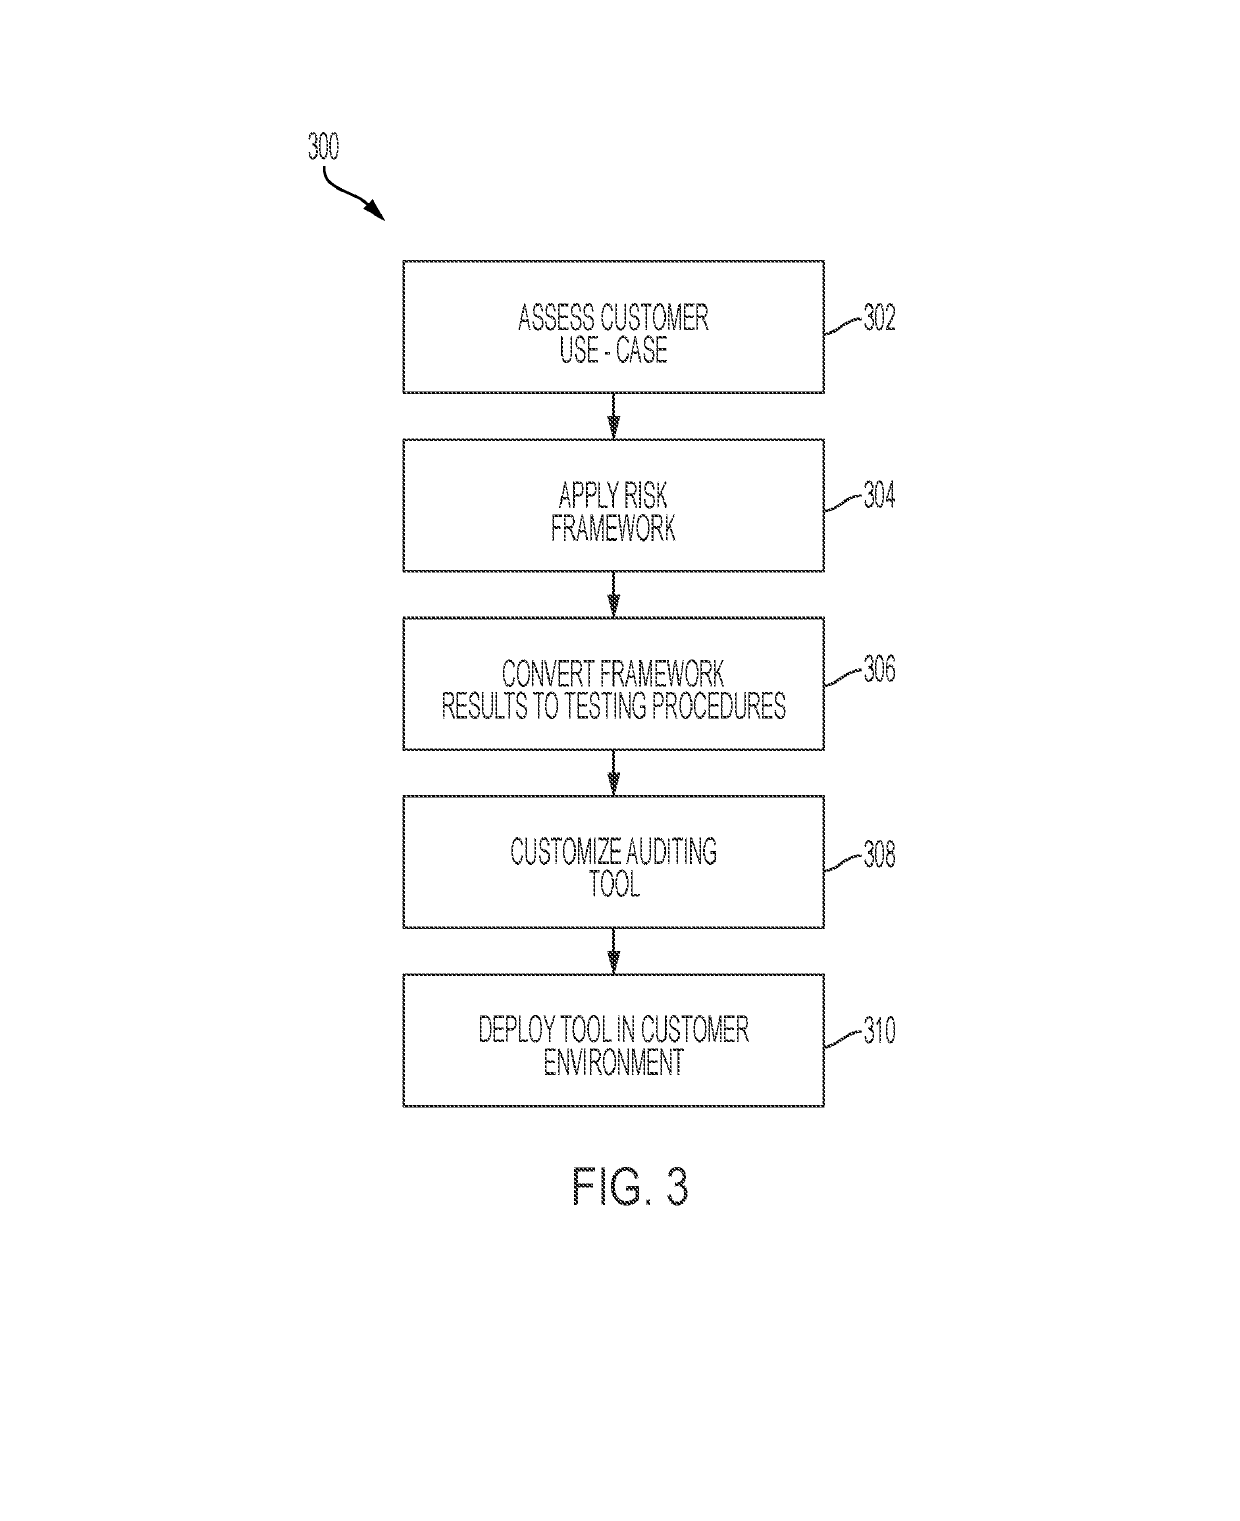 System and method for validation of distributed data storage systems